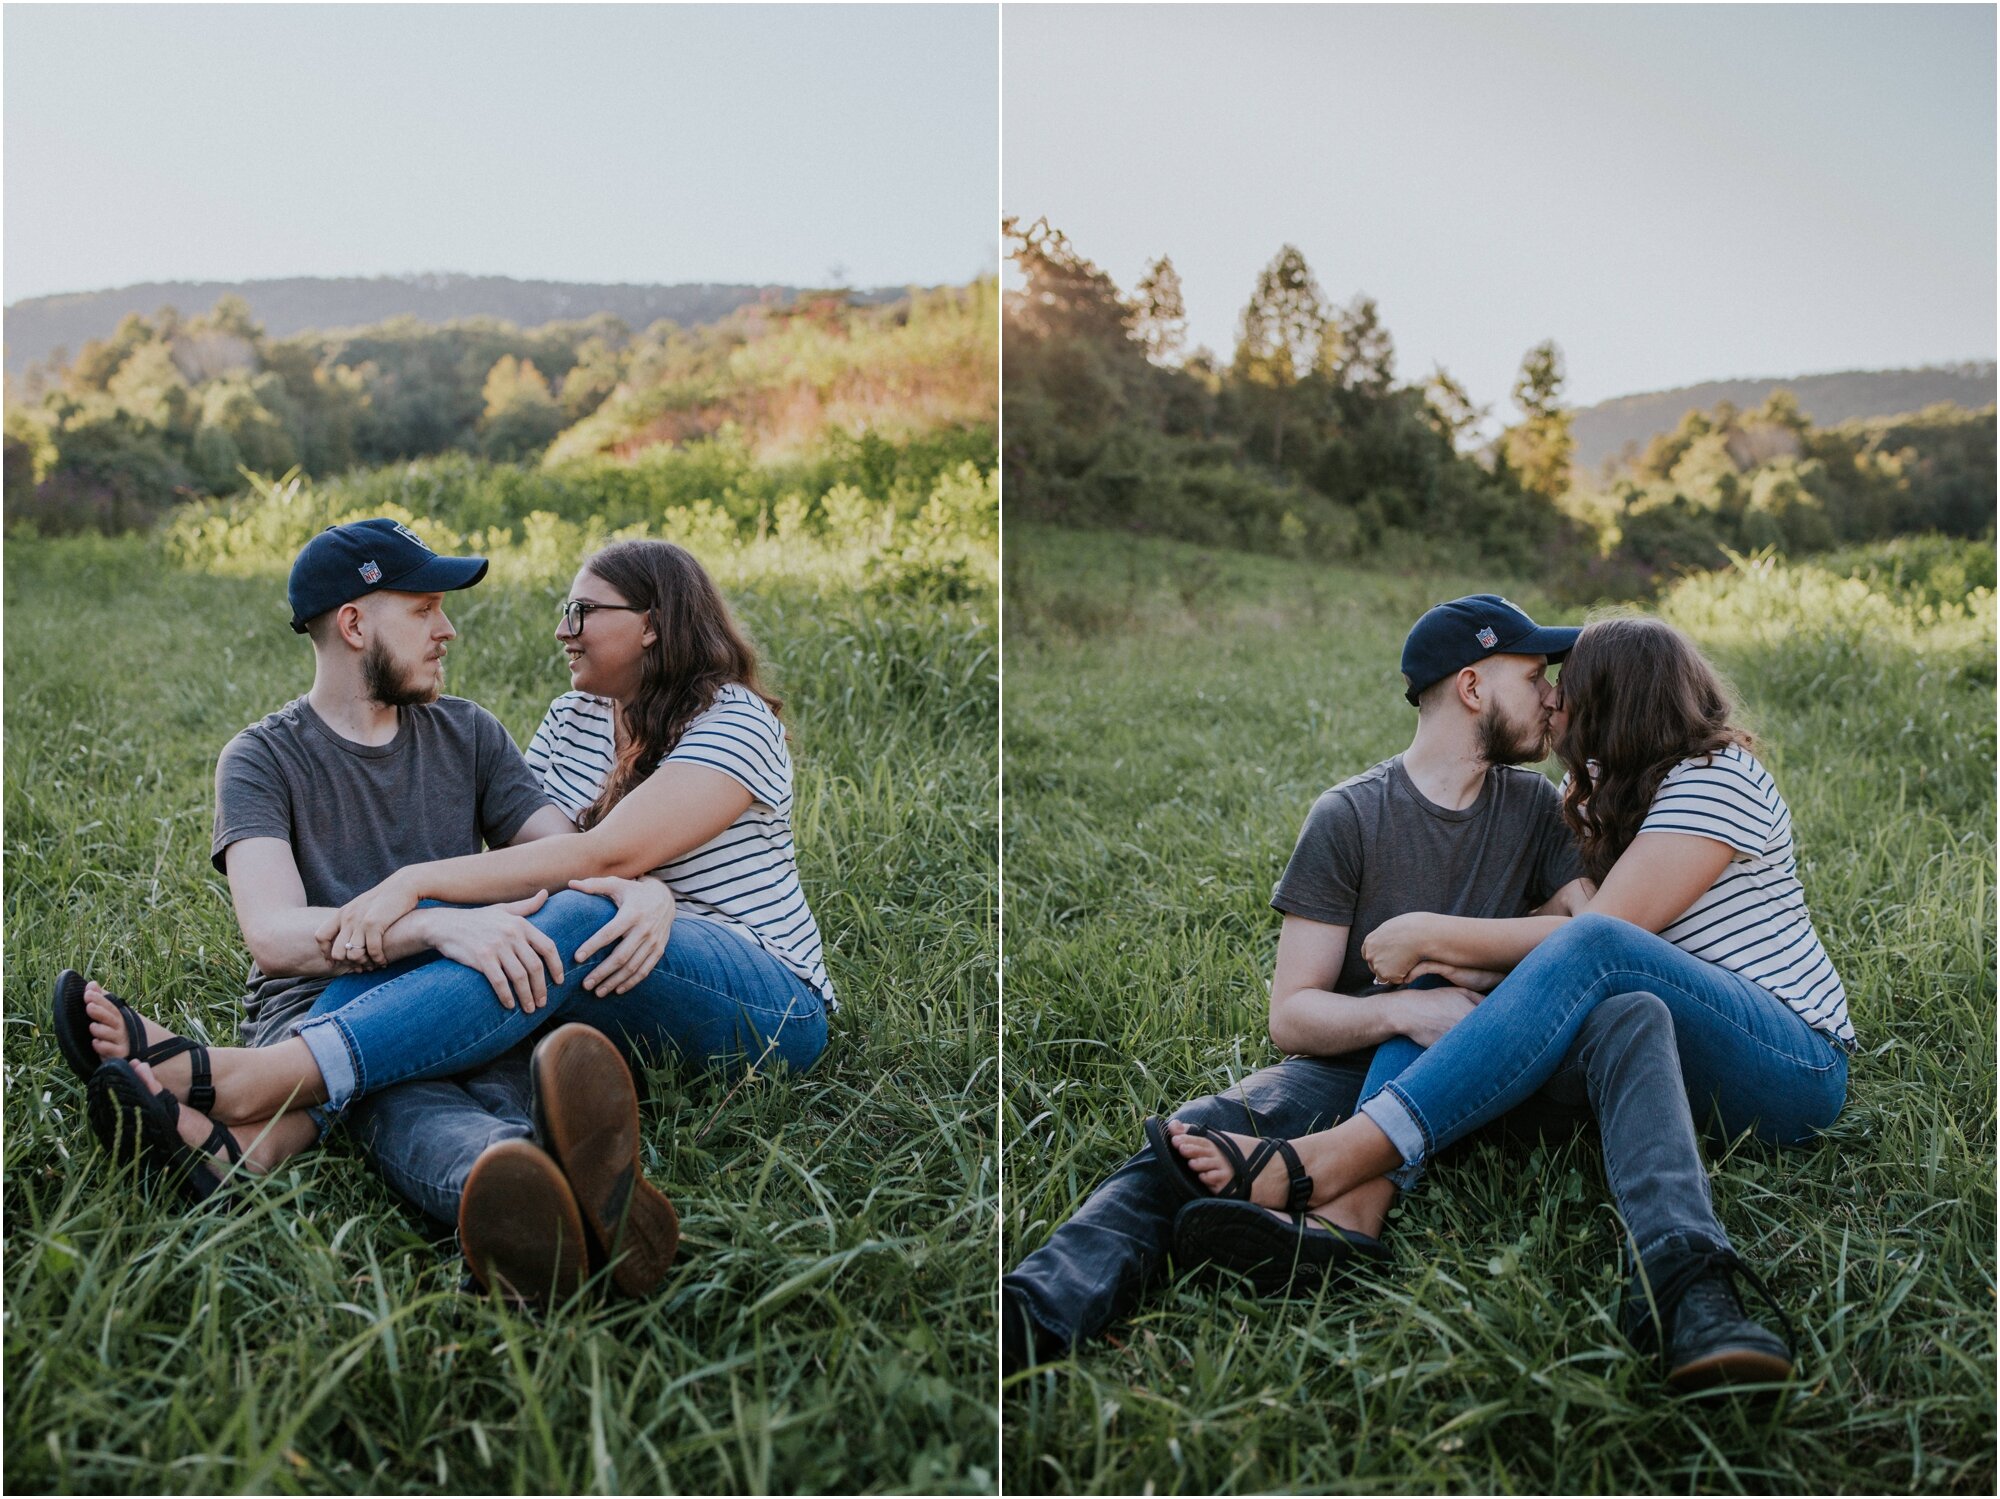 kingsport-tennessee-backyard-pond-bays-mountain-summer-engagement-session_0011.jpg